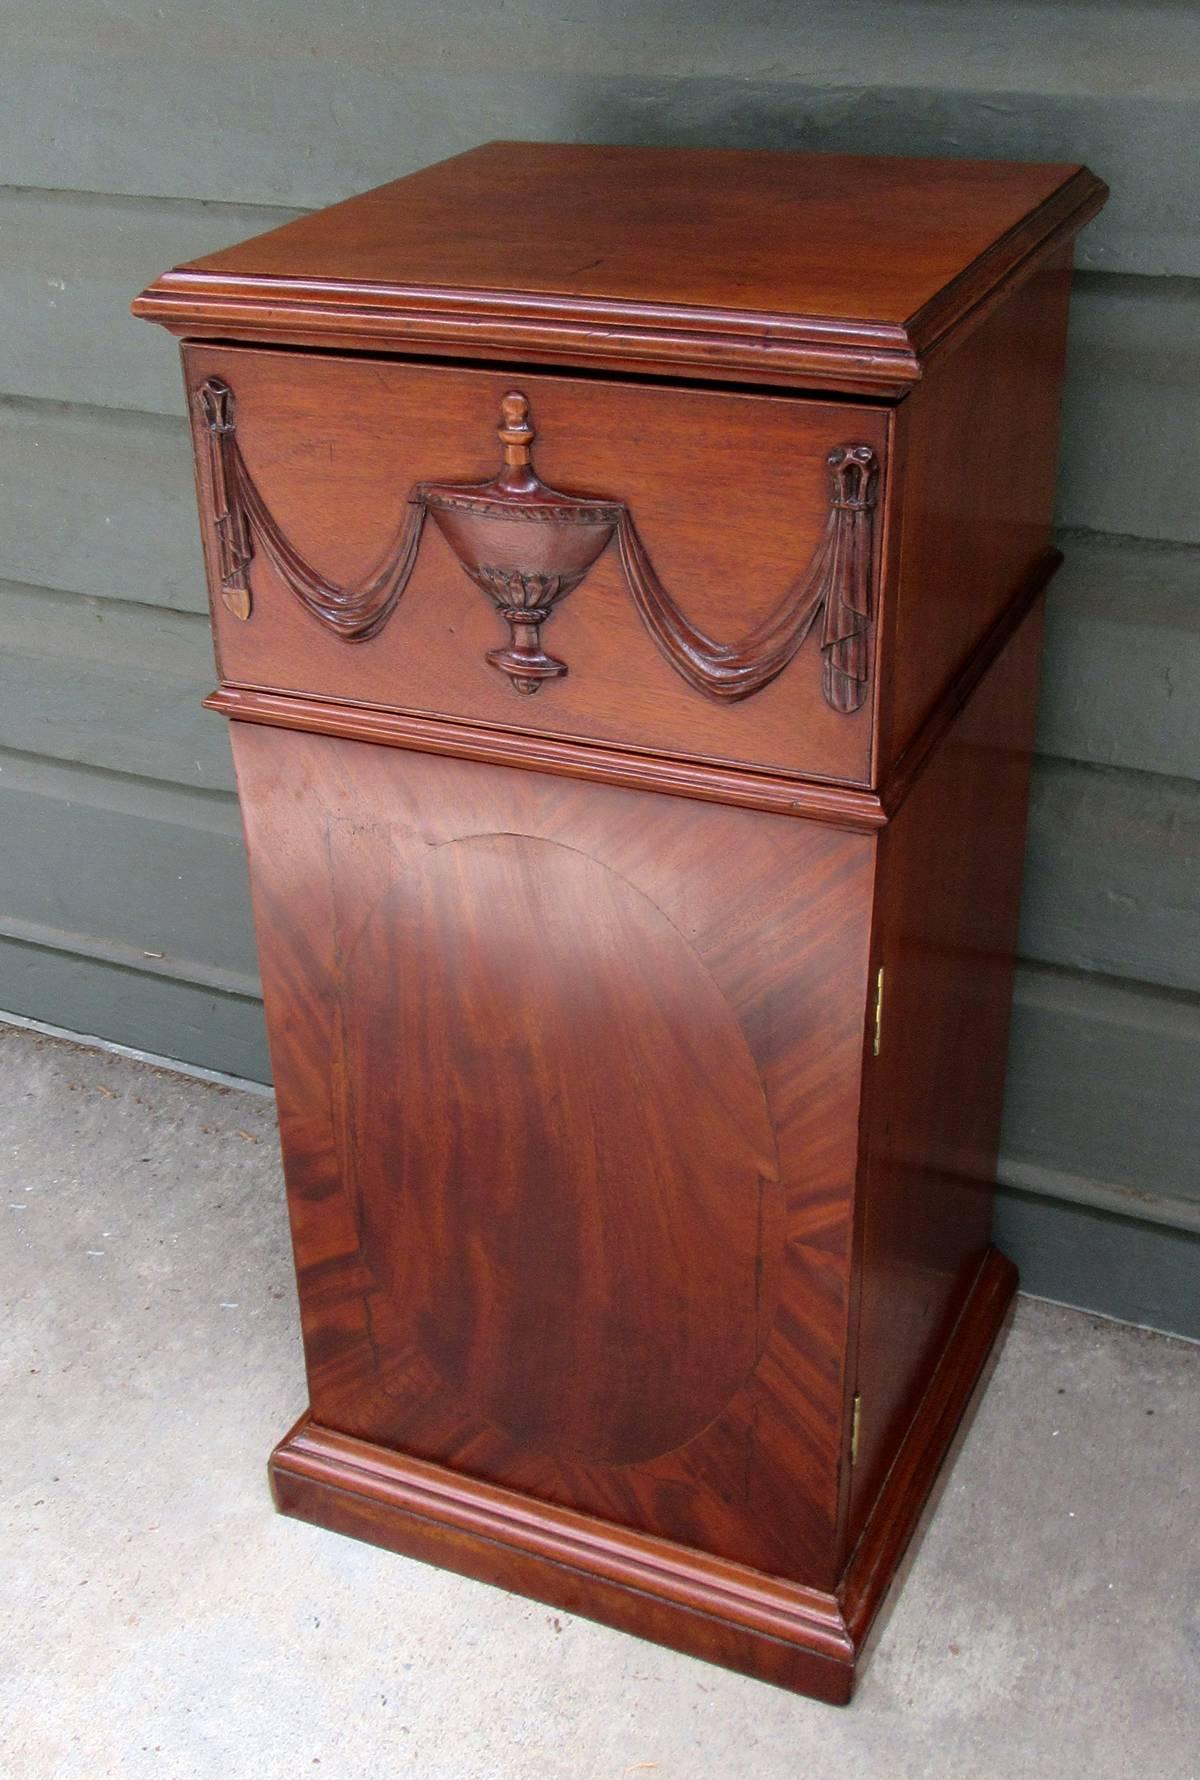 An early 19th century English Regency mahogany pedestal cabinet, circa 1810, featuring an urn with swag carved drawer and single cabinet door below.